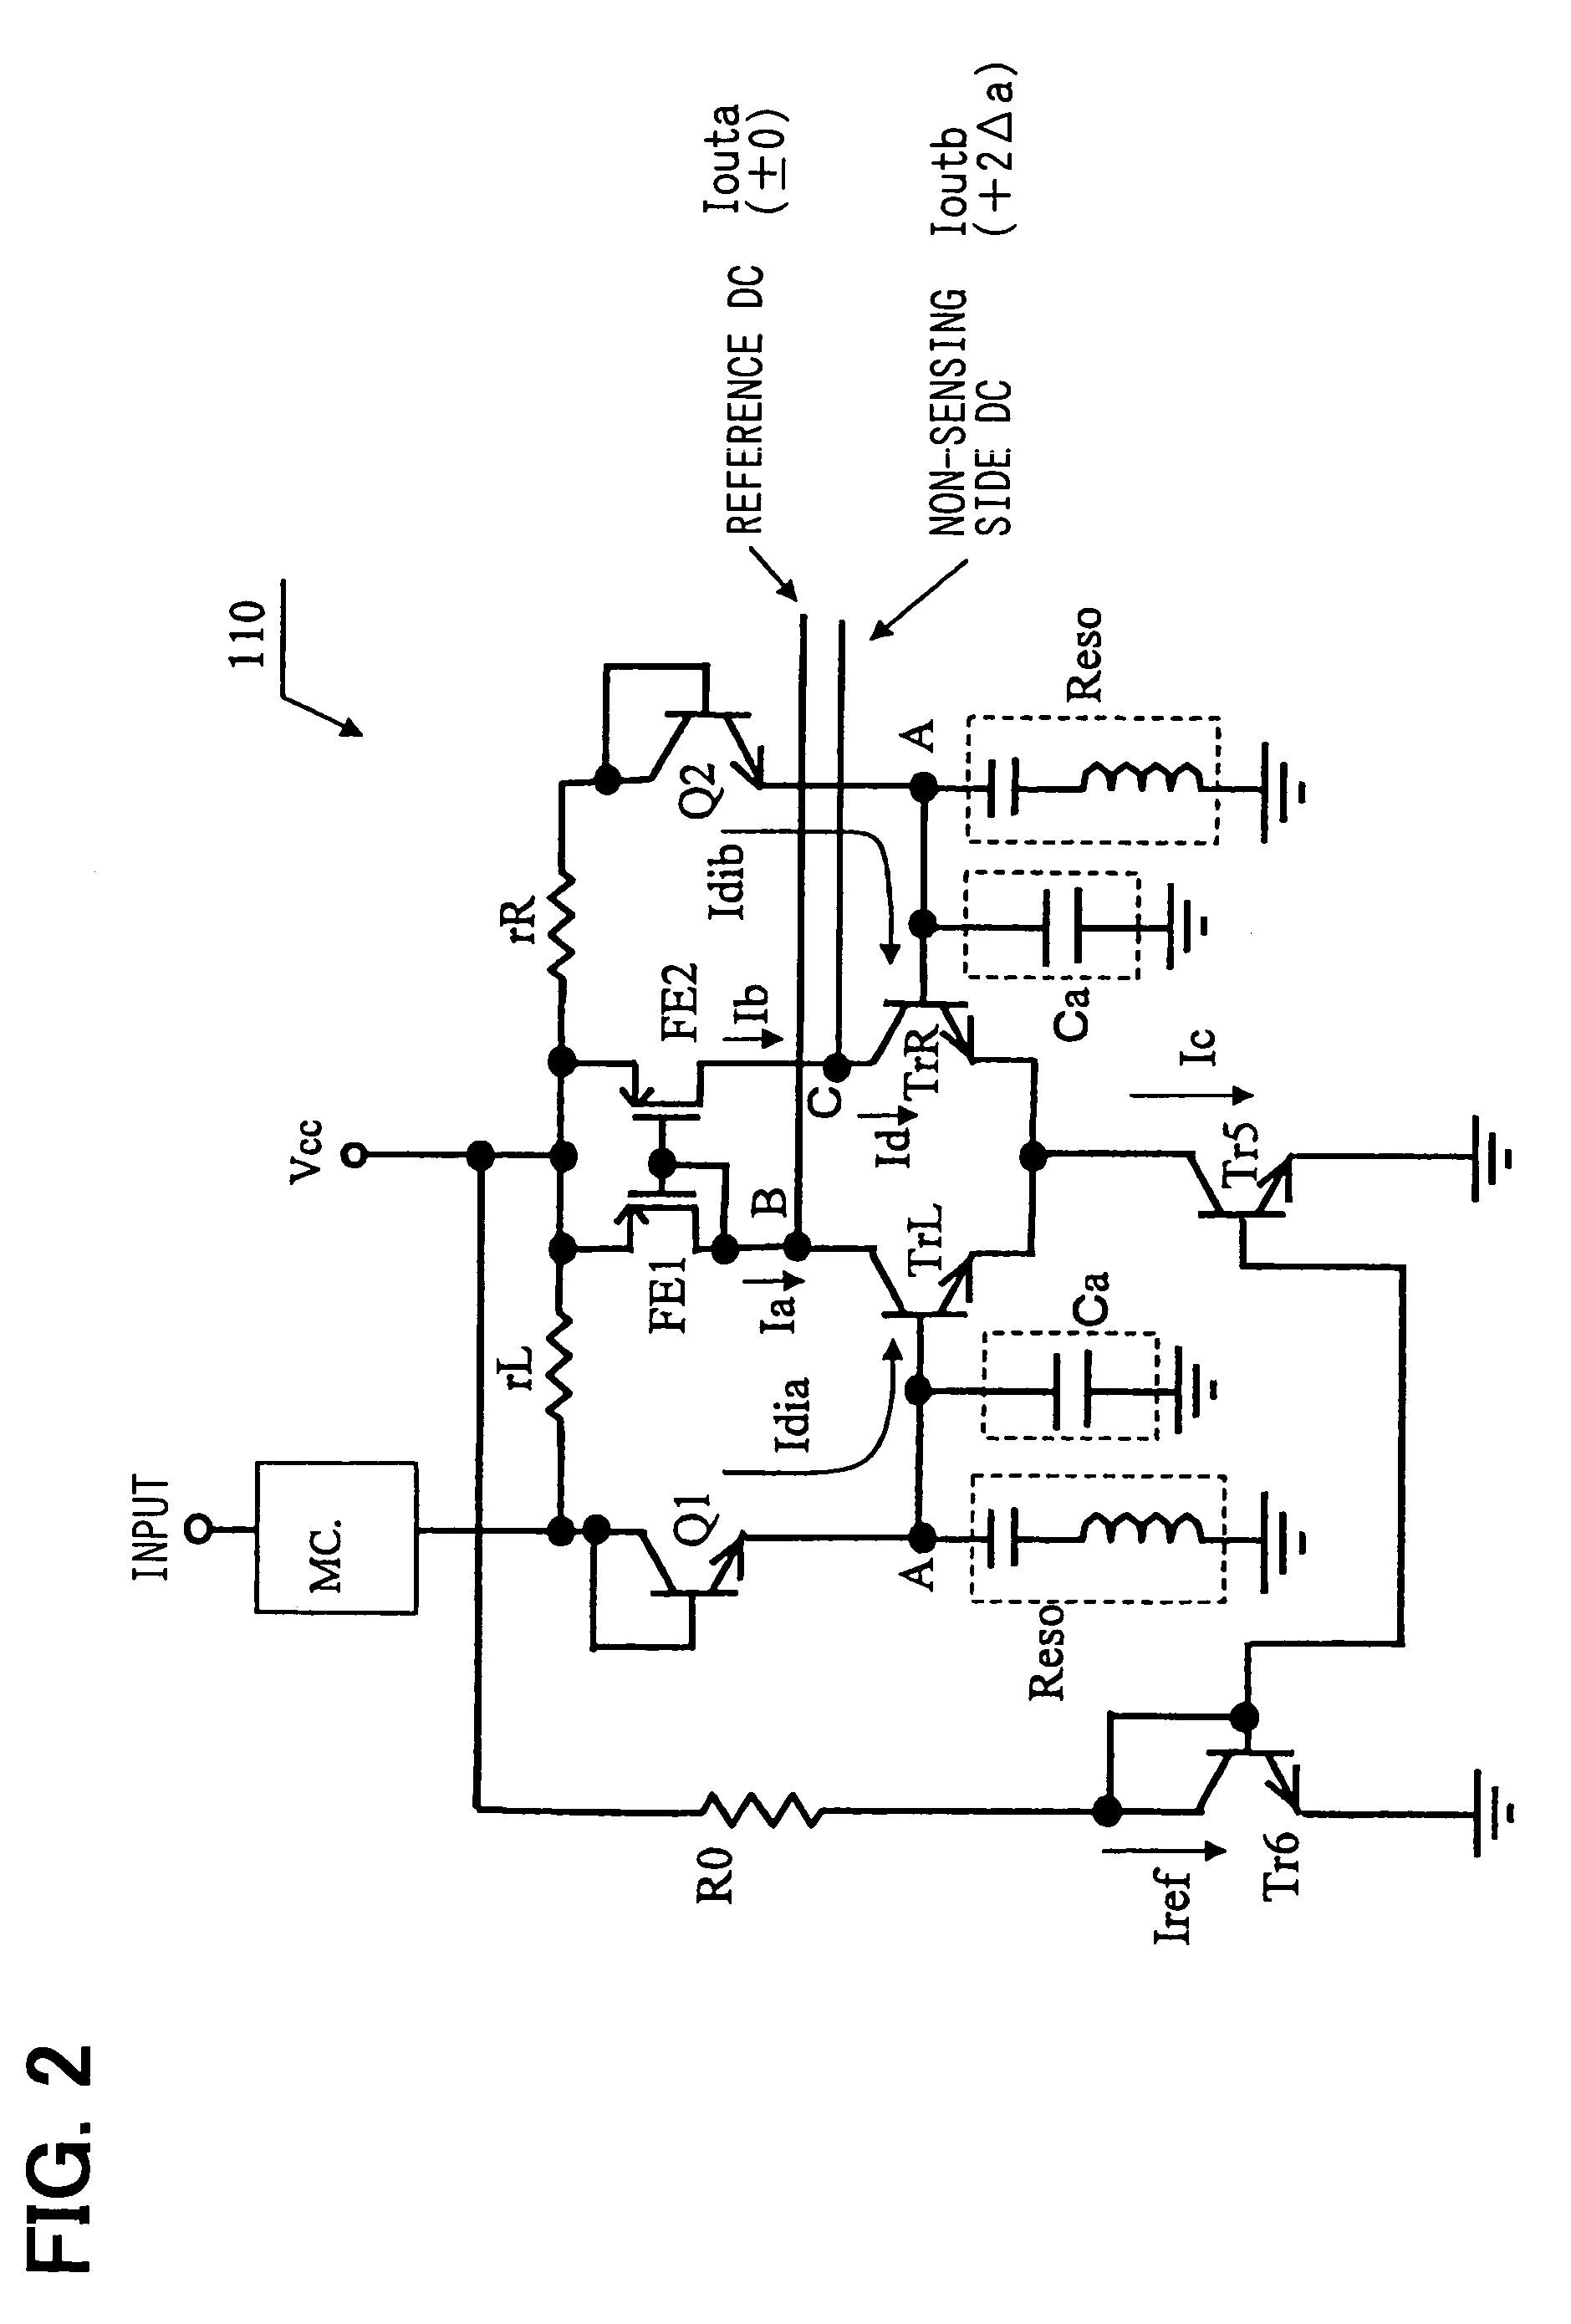 Activation signal output circuit and determination circuit